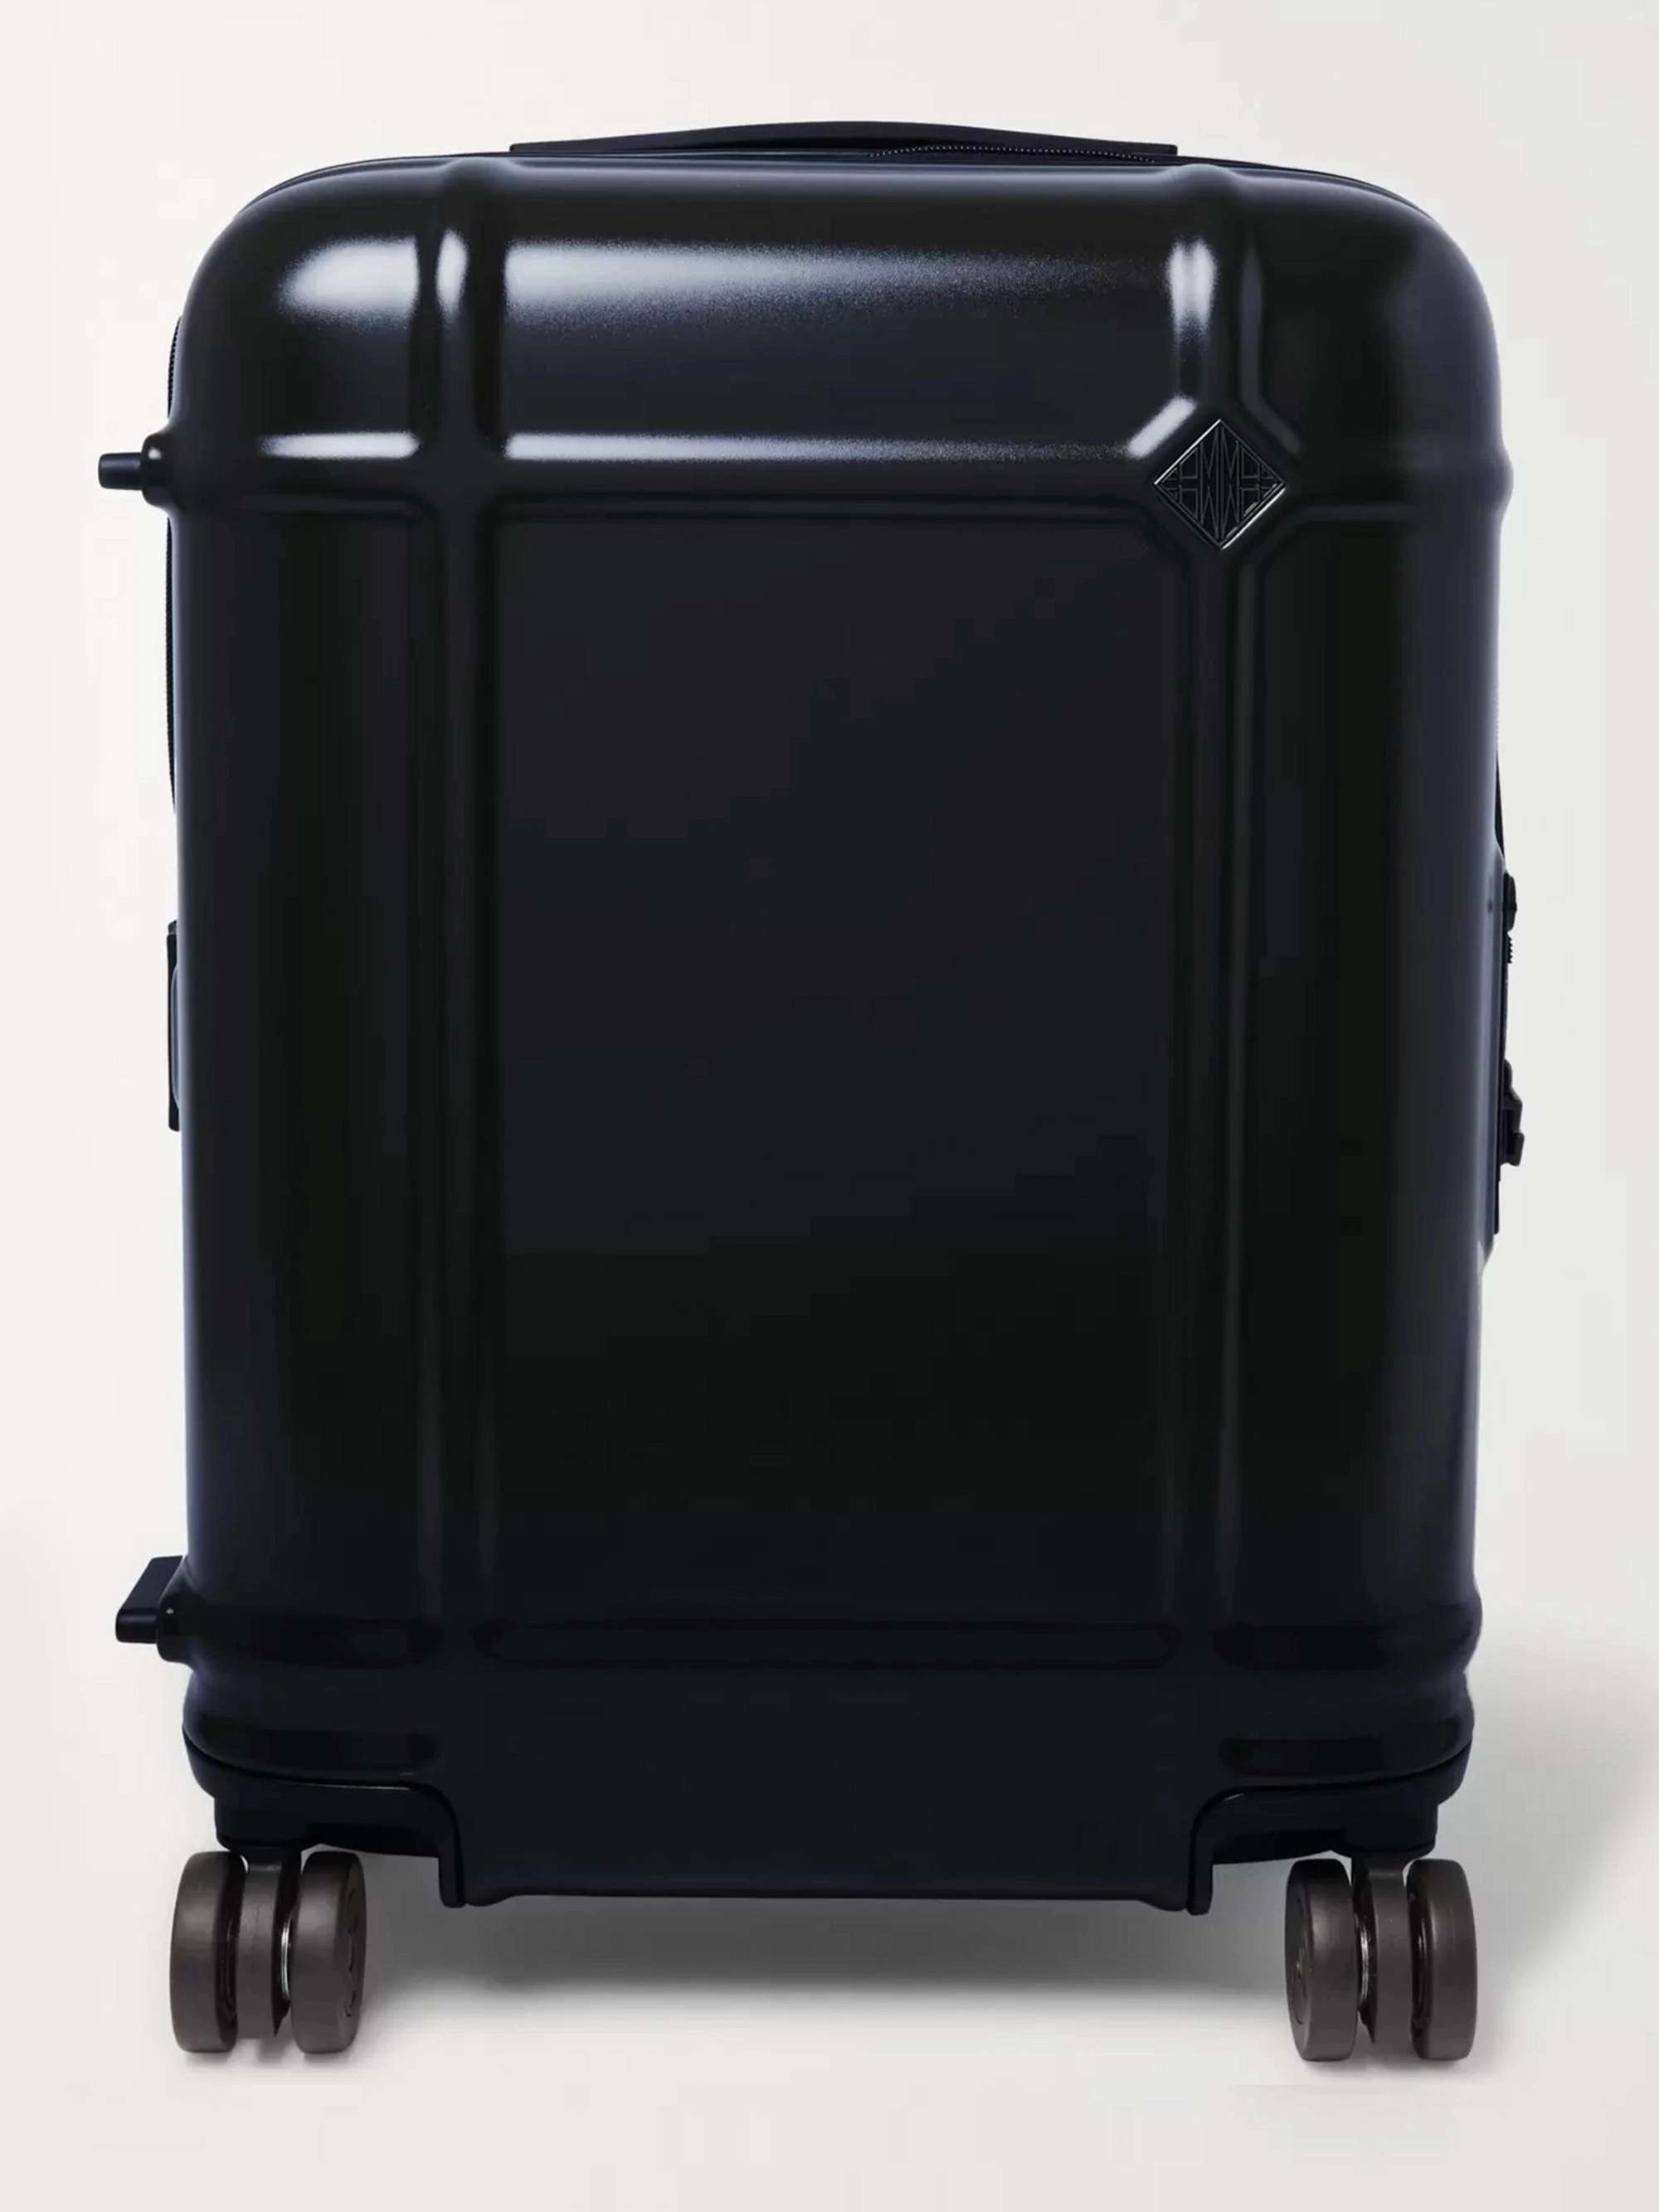 FPM MILANO Globe Spinner 55cm Leather-Trimmed Polycarbonate Carry-On Suitcase